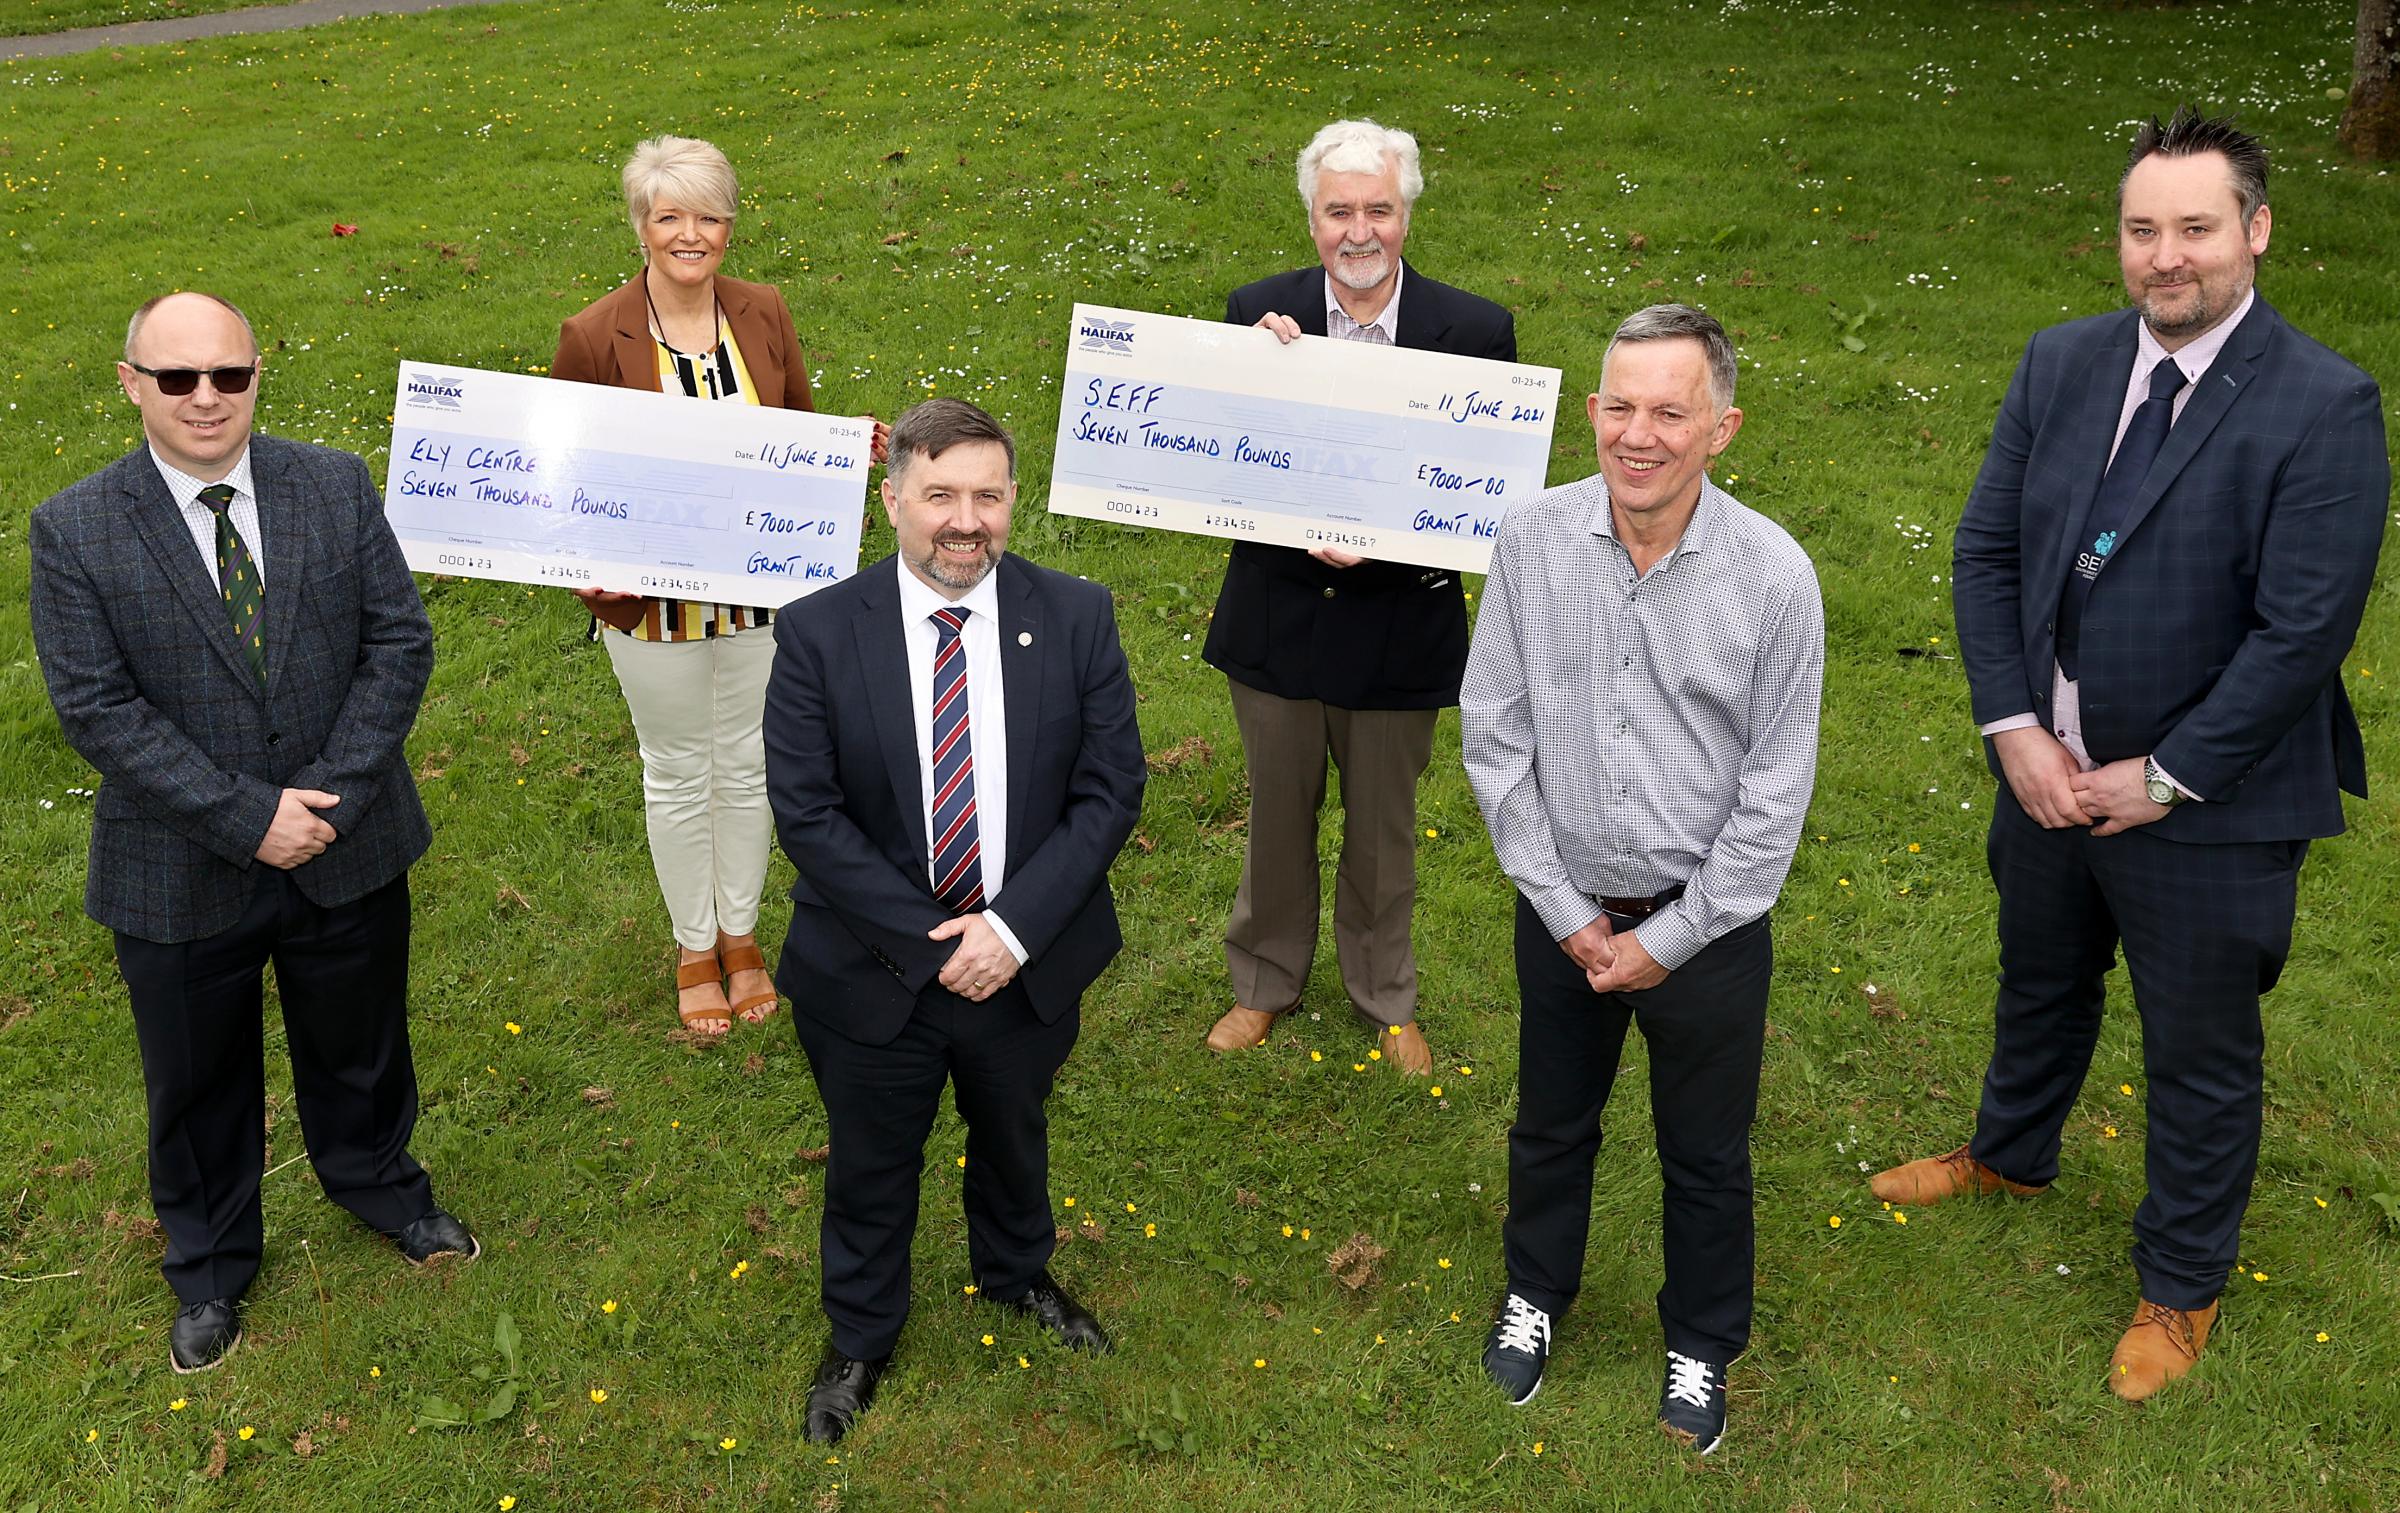 Health Minster pays tribute to Grant as he raises £14,000 for local charities